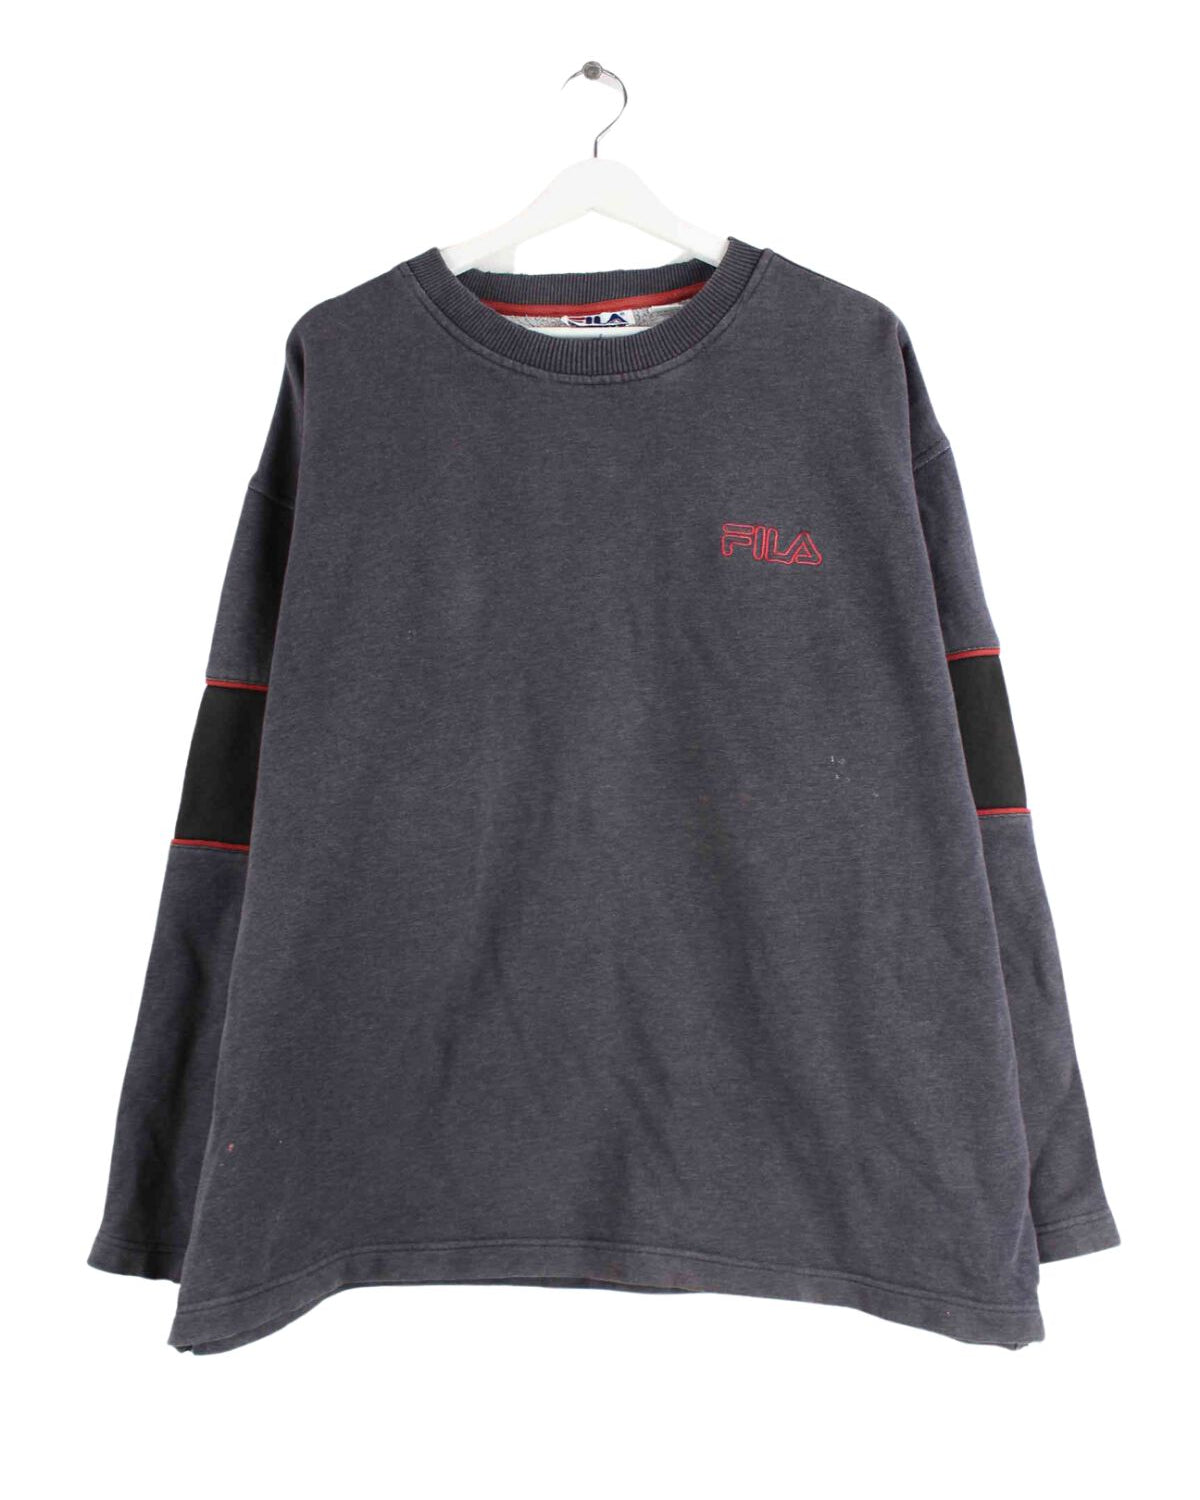 Fila 90s Vintage Embroidered Sweater Grau L (front image)